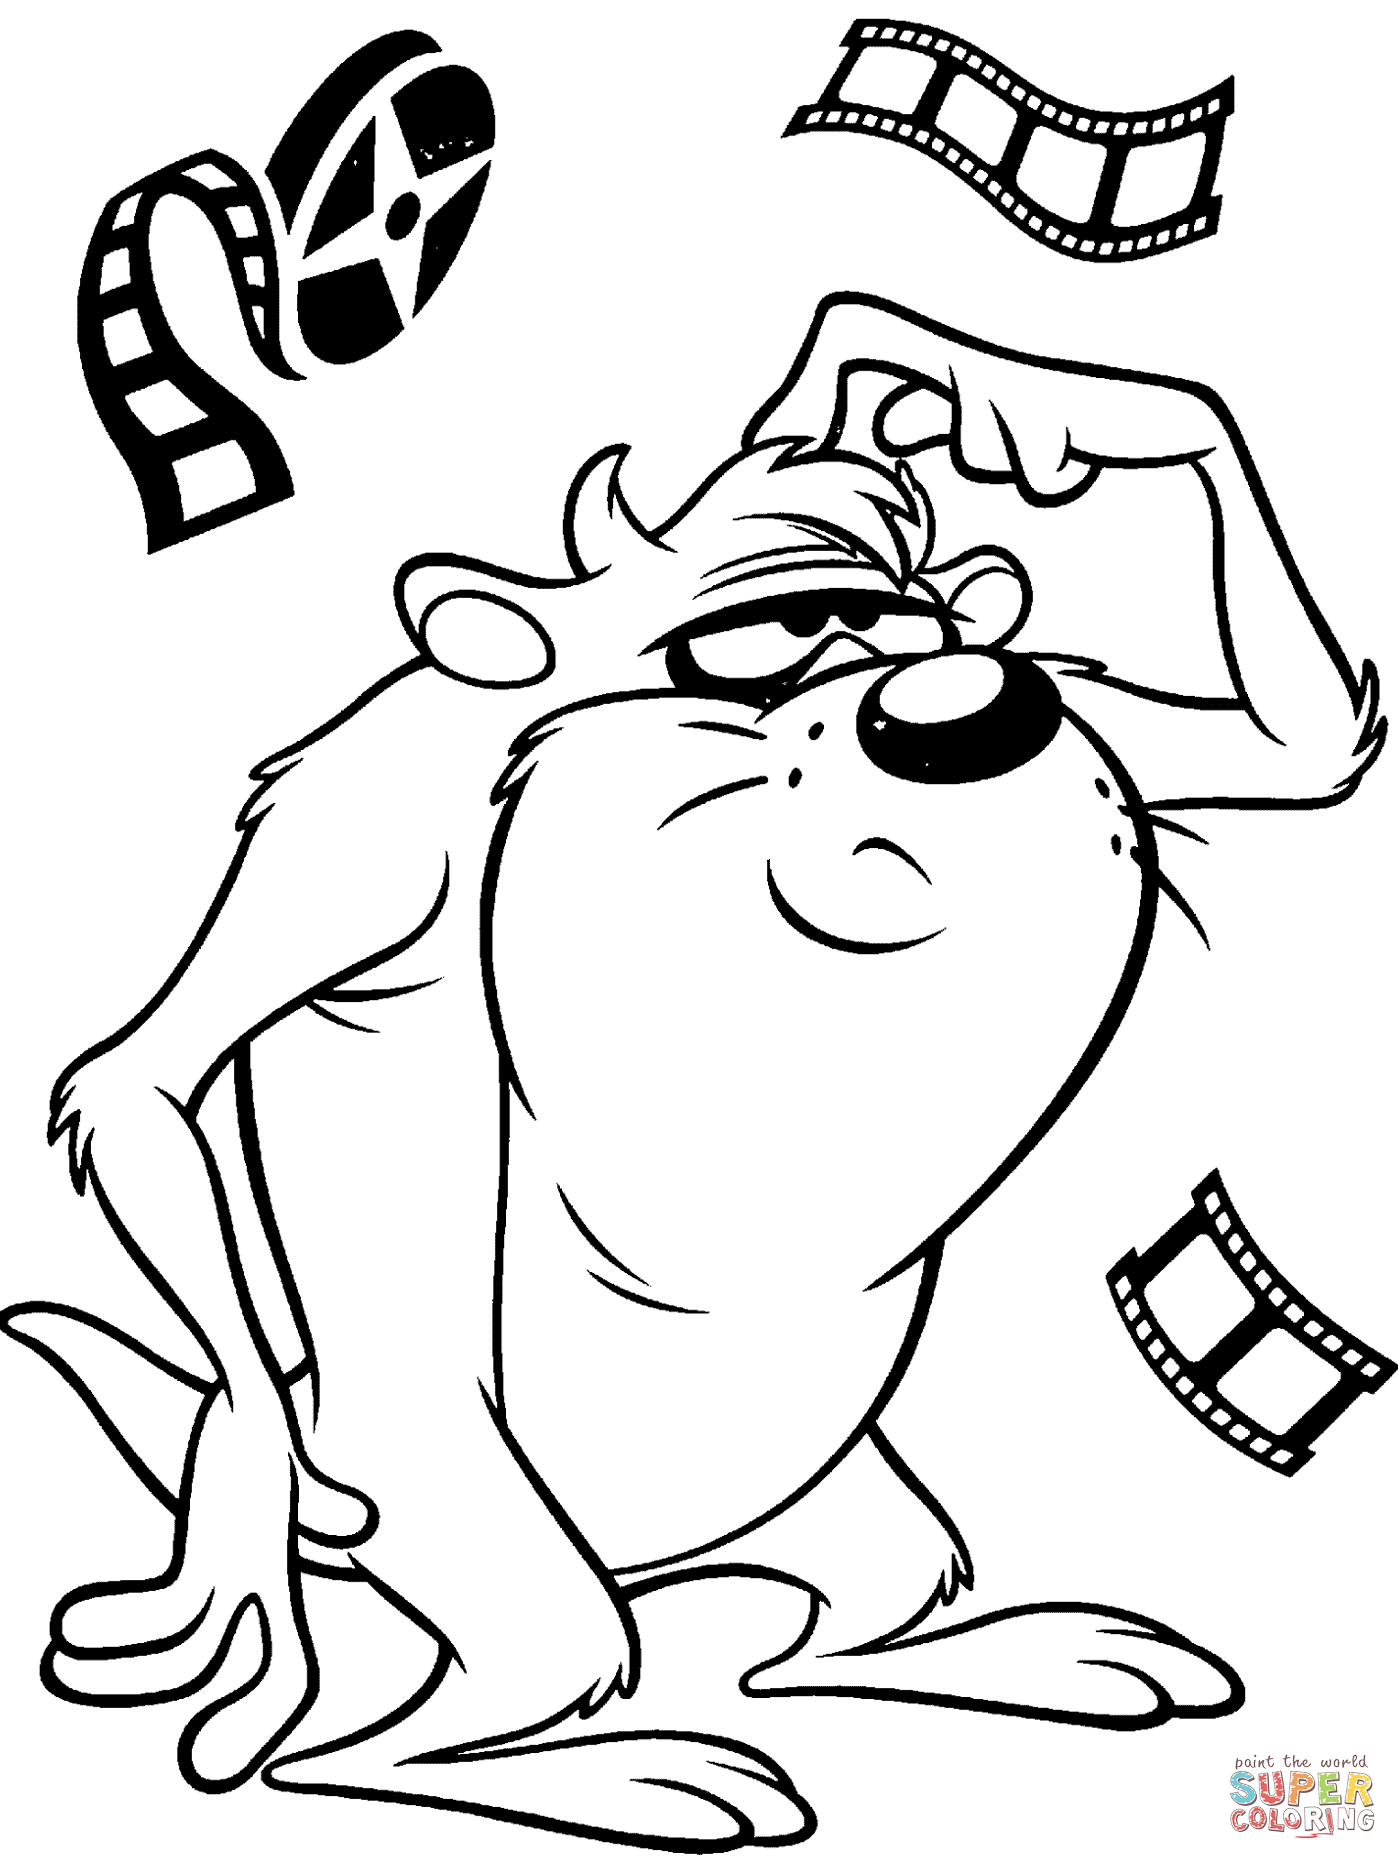 Taz coloring page | Free Printable Coloring Pages